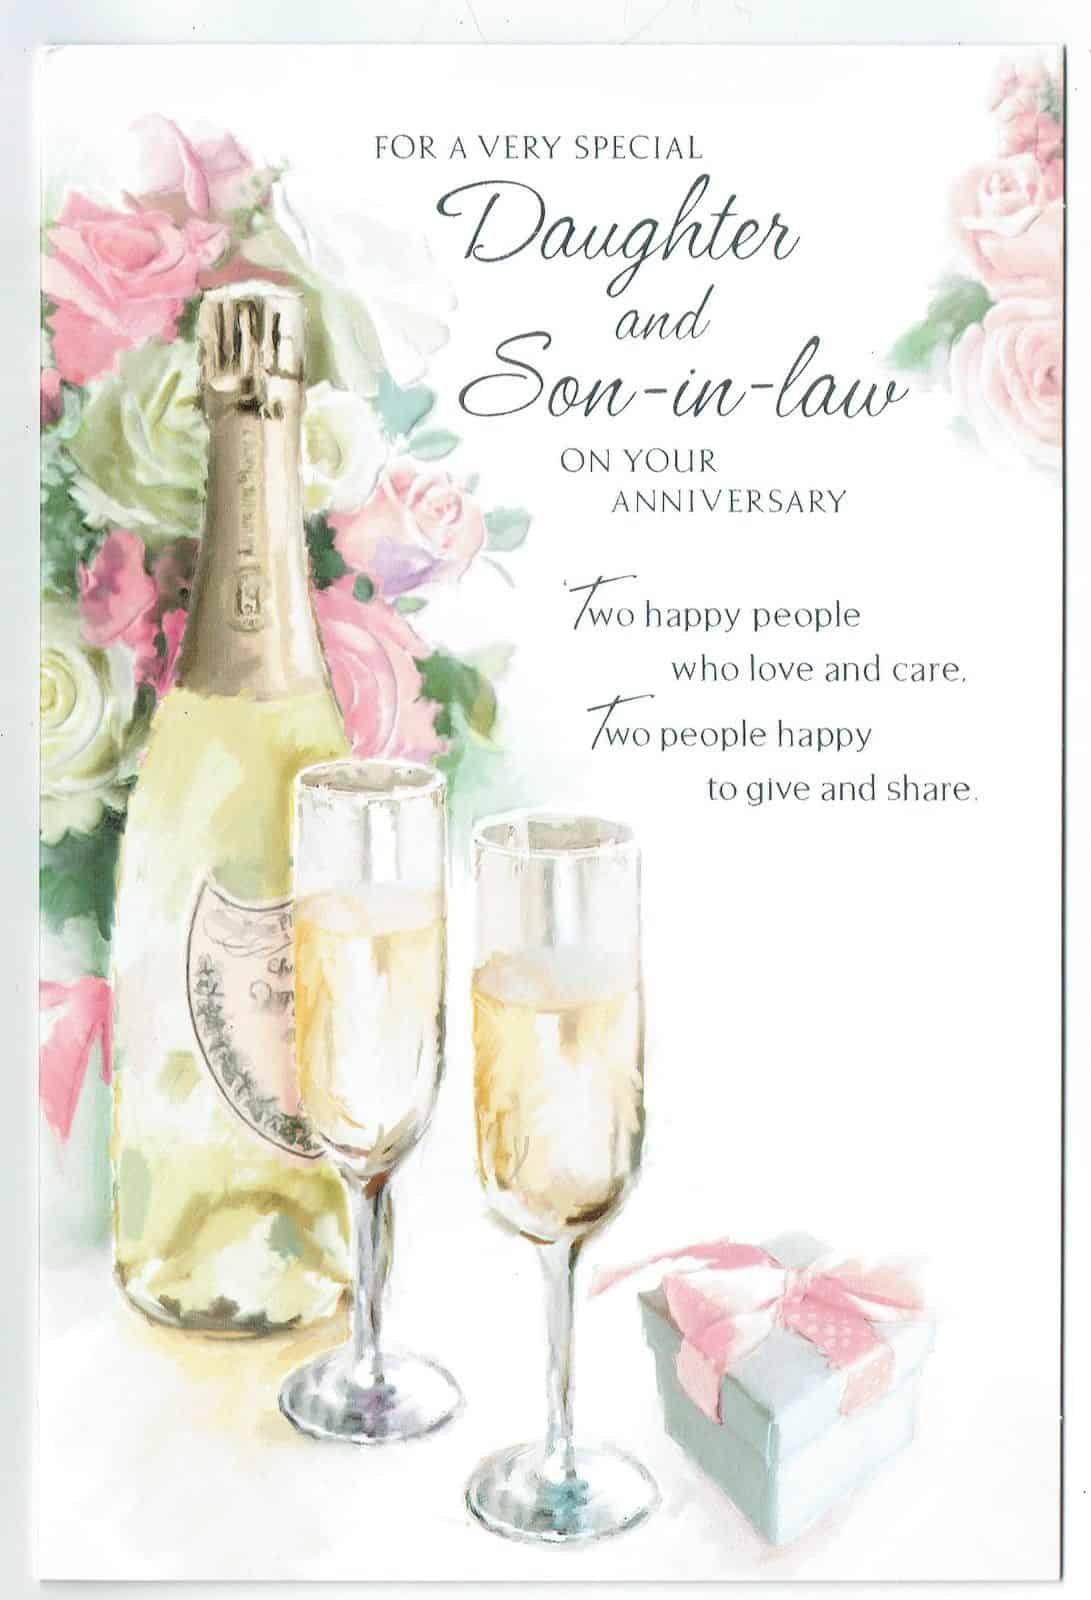 daughter-and-son-in-law-anniversary-card-for-a-very-special-daughter-and-son-in-law-on-your